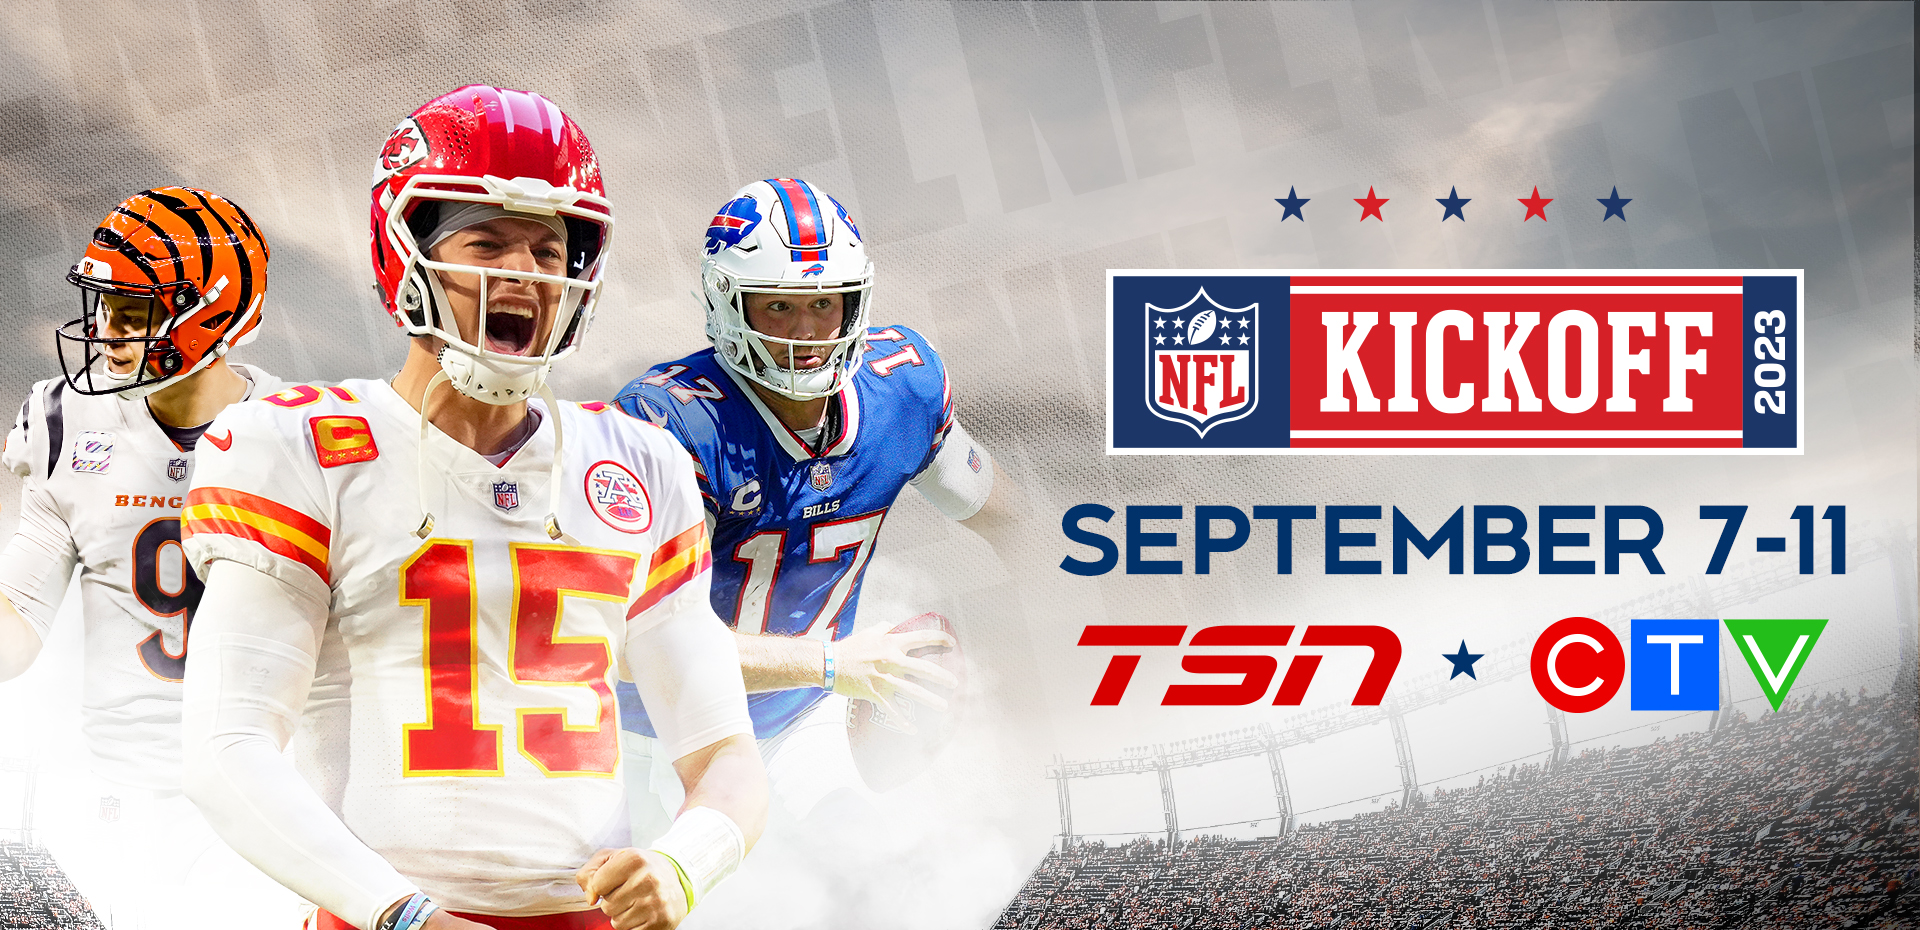 NFL Lives Here TSN and CTV Deliver Wall-to-Wall Coverage of the 2023 NFL Season, Kicking Off September 7